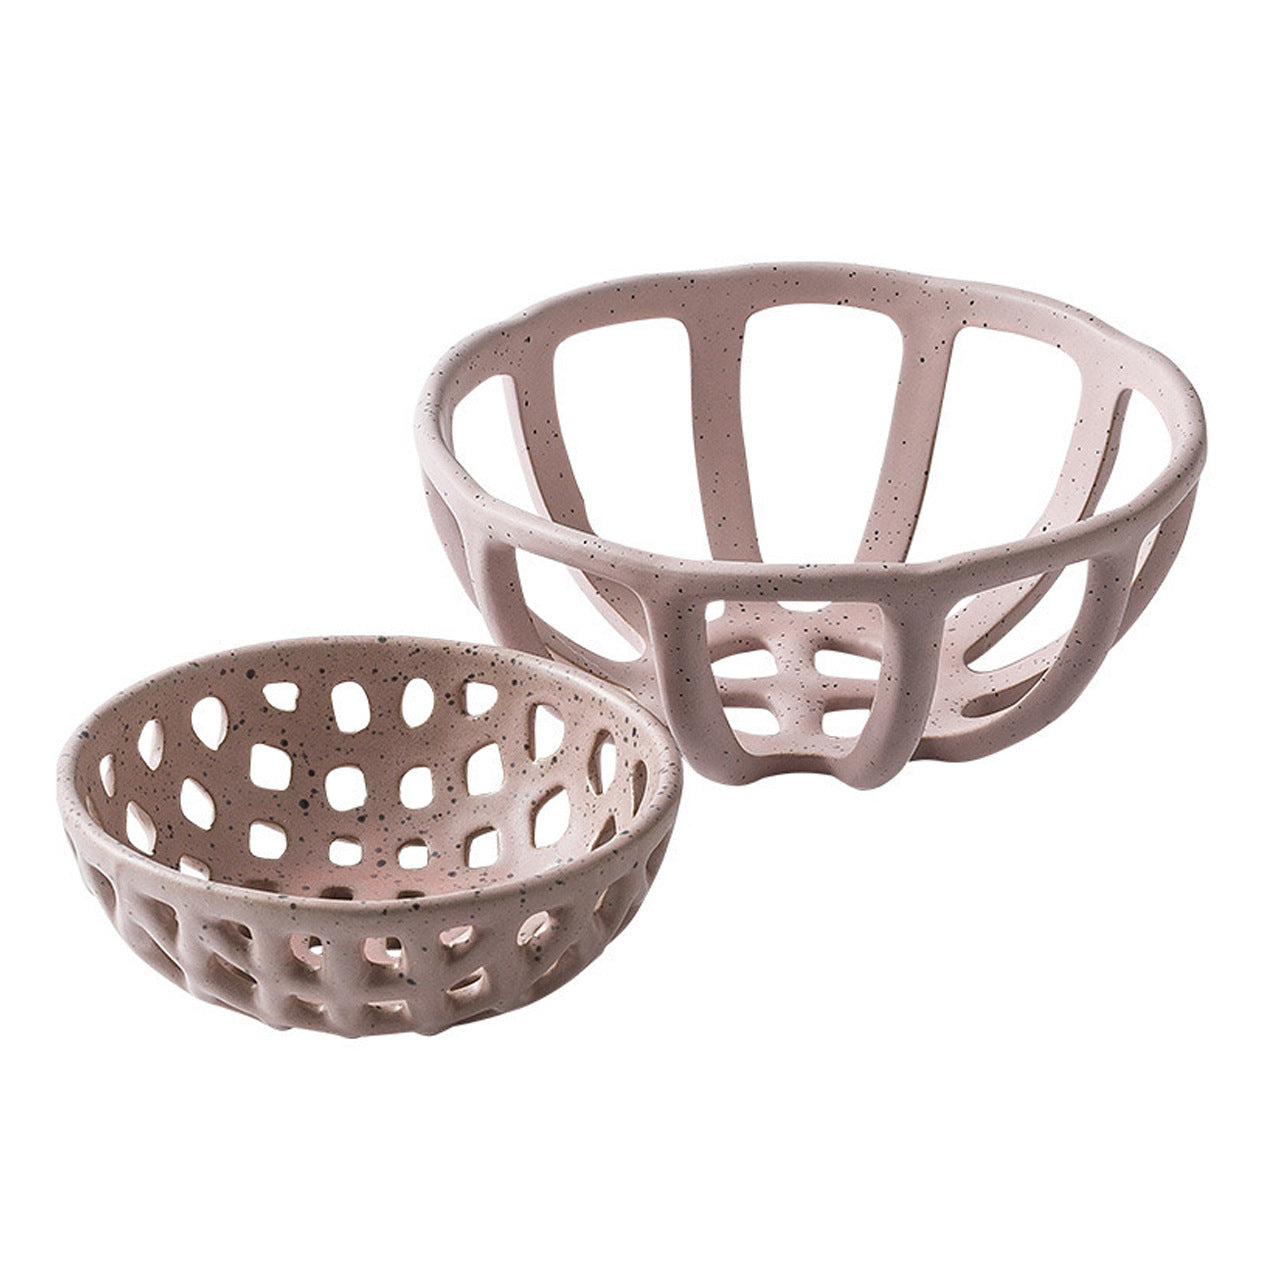 Wicker-Style Fruit Basket ， Vintage Ceramic Bowl with Rattan Weave Design，Rattan-Inspired Fruit Bowl - Durable Ceramic with Natural Wicker Aesthetic，6.1in*2.1in